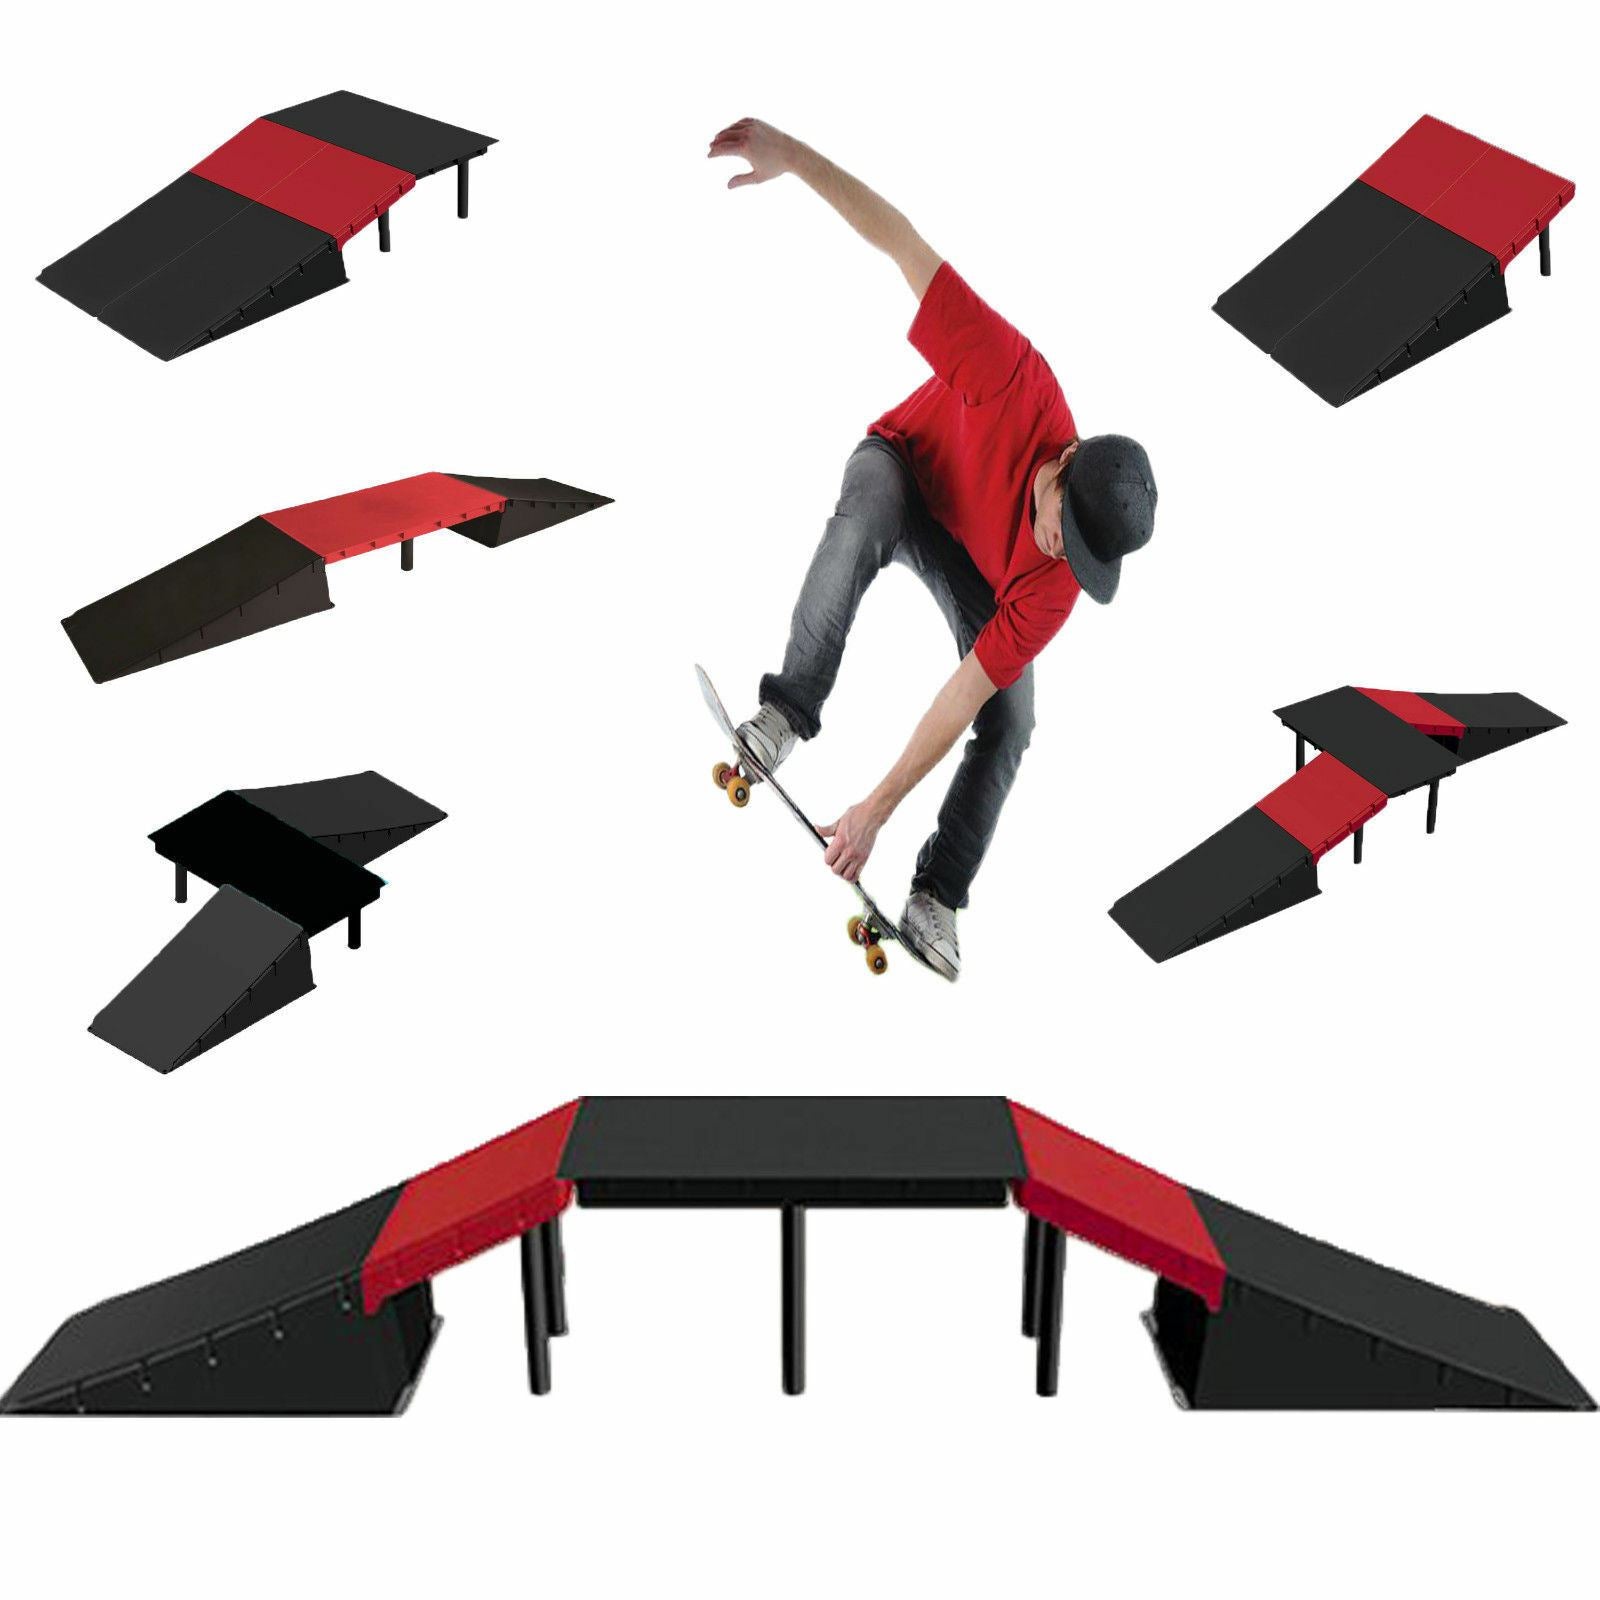 Multi-Functional 6-in-1 Ramp Set by GEEZY - The Magic Toy Shop